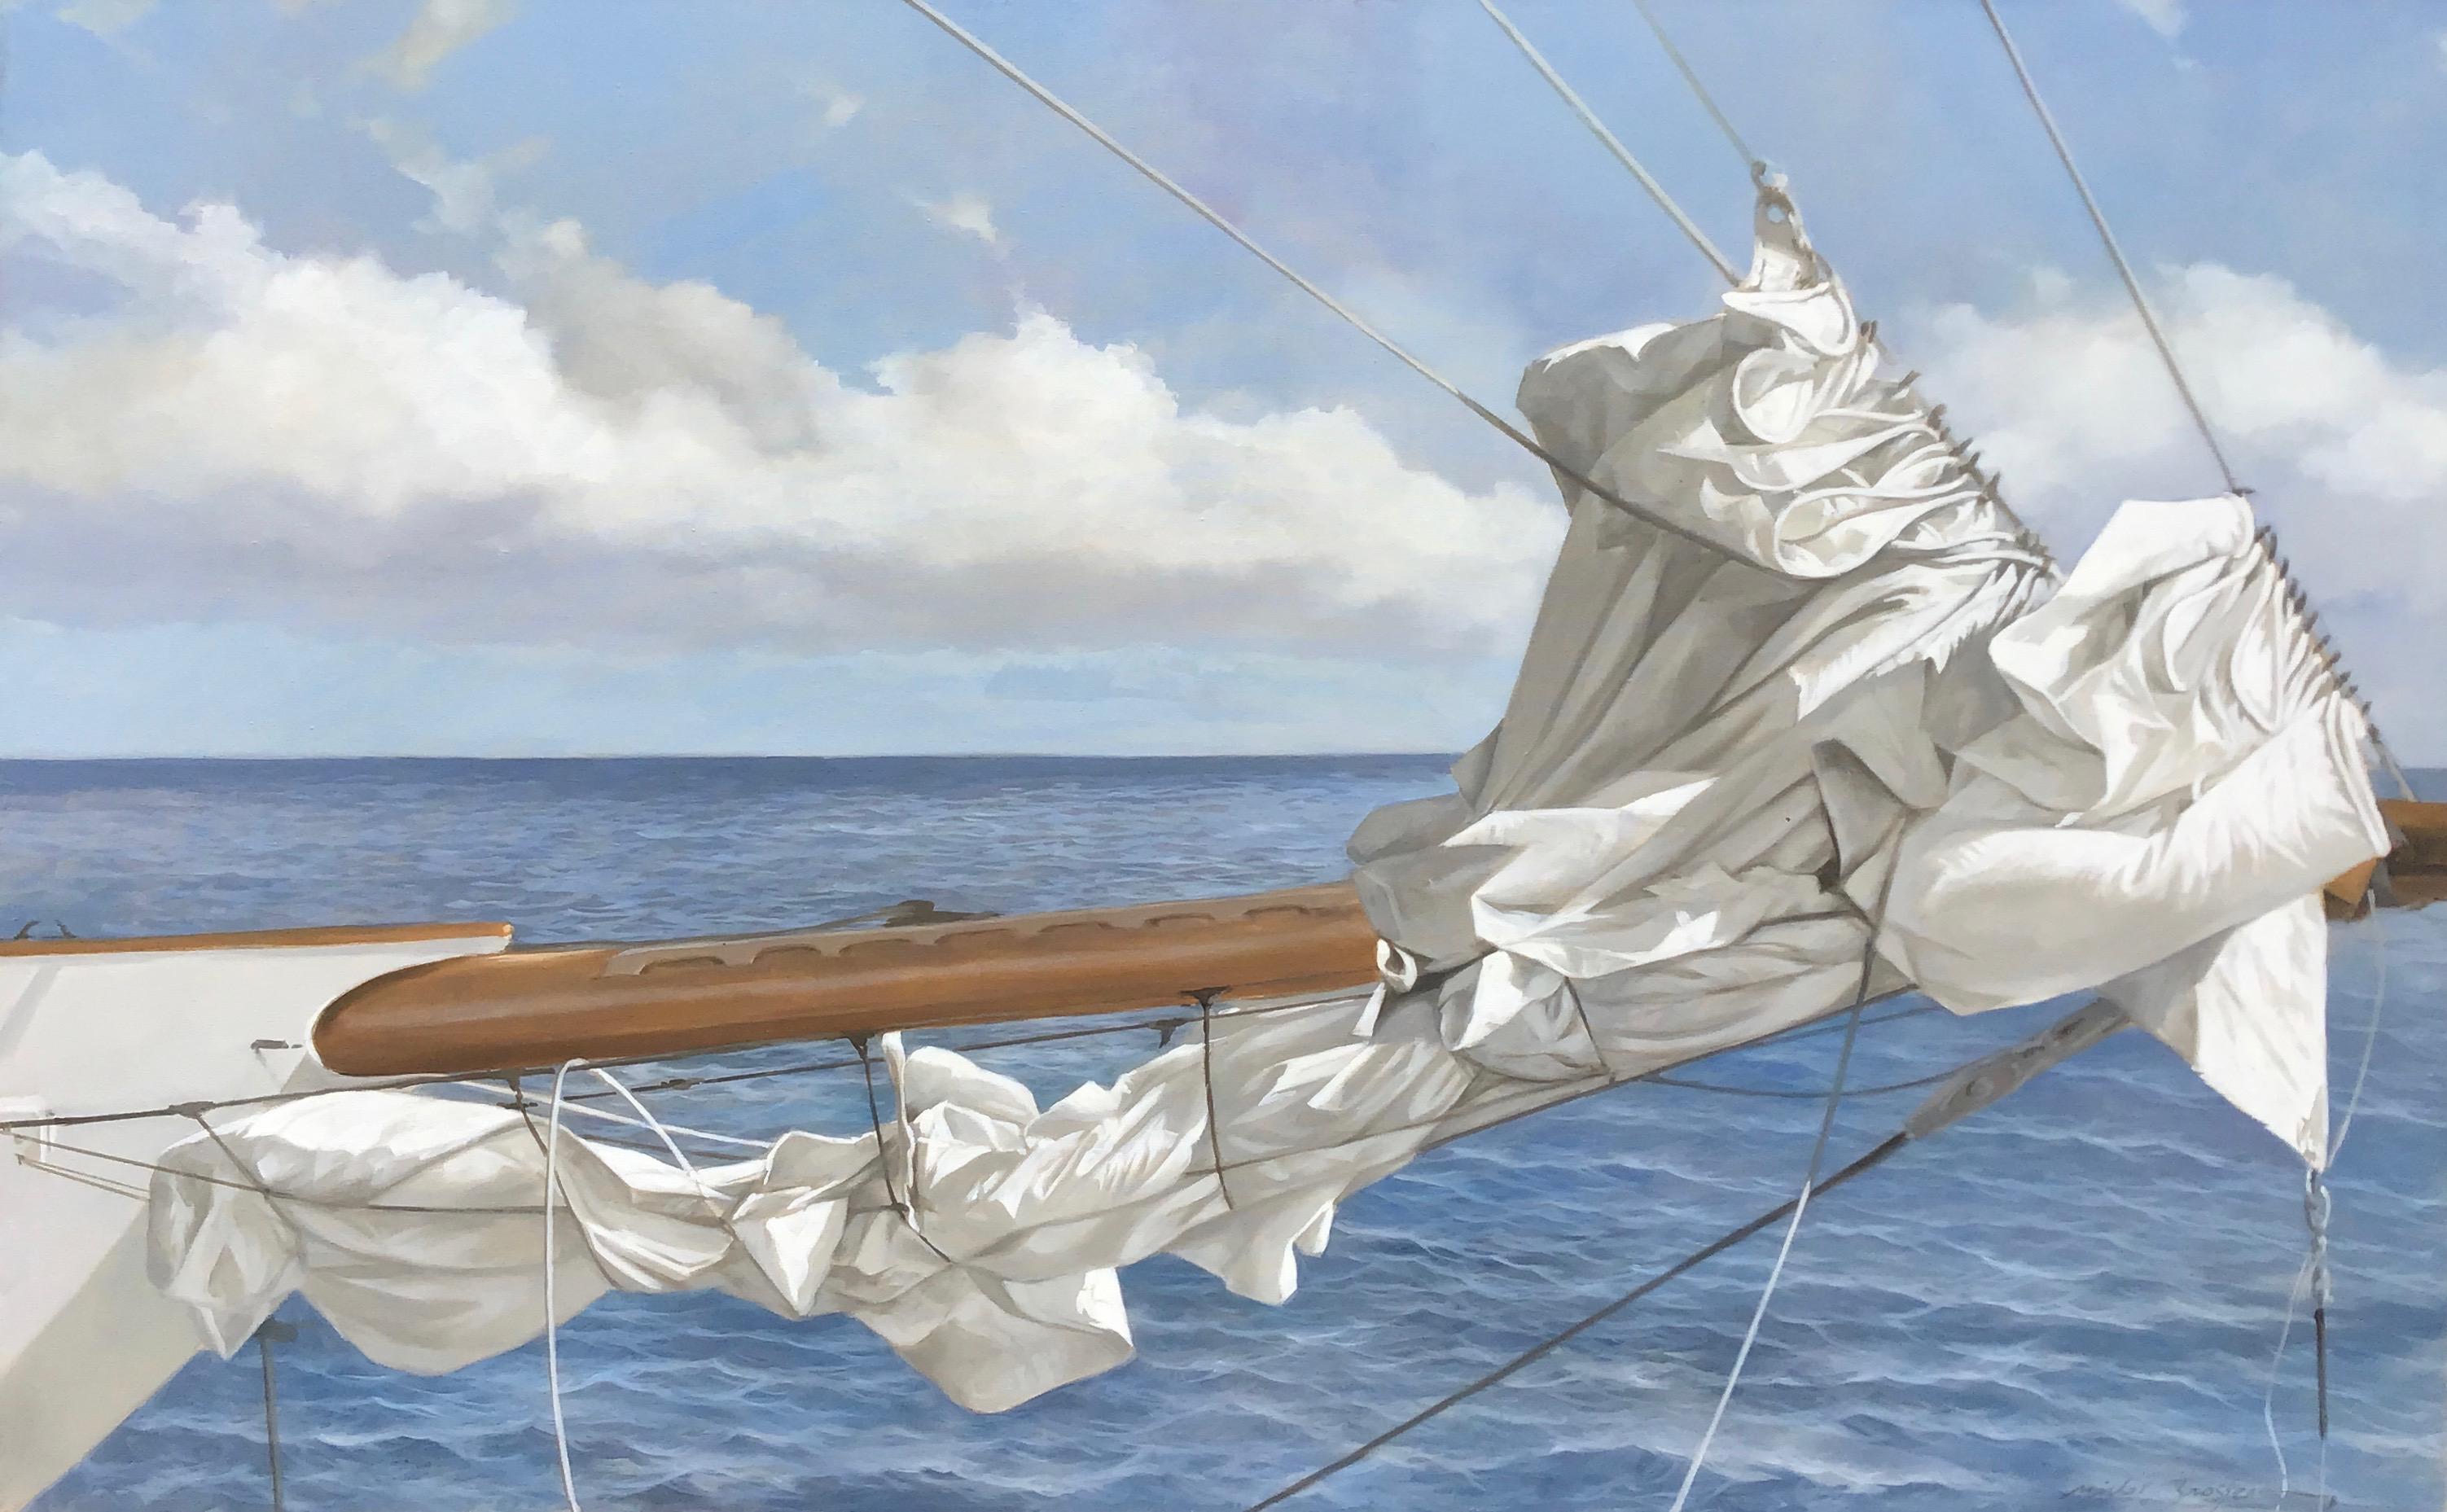 Michel Brosseau Landscape Painting - "Tied at Sea" oil painting of a folded white sail with blue ocean behind